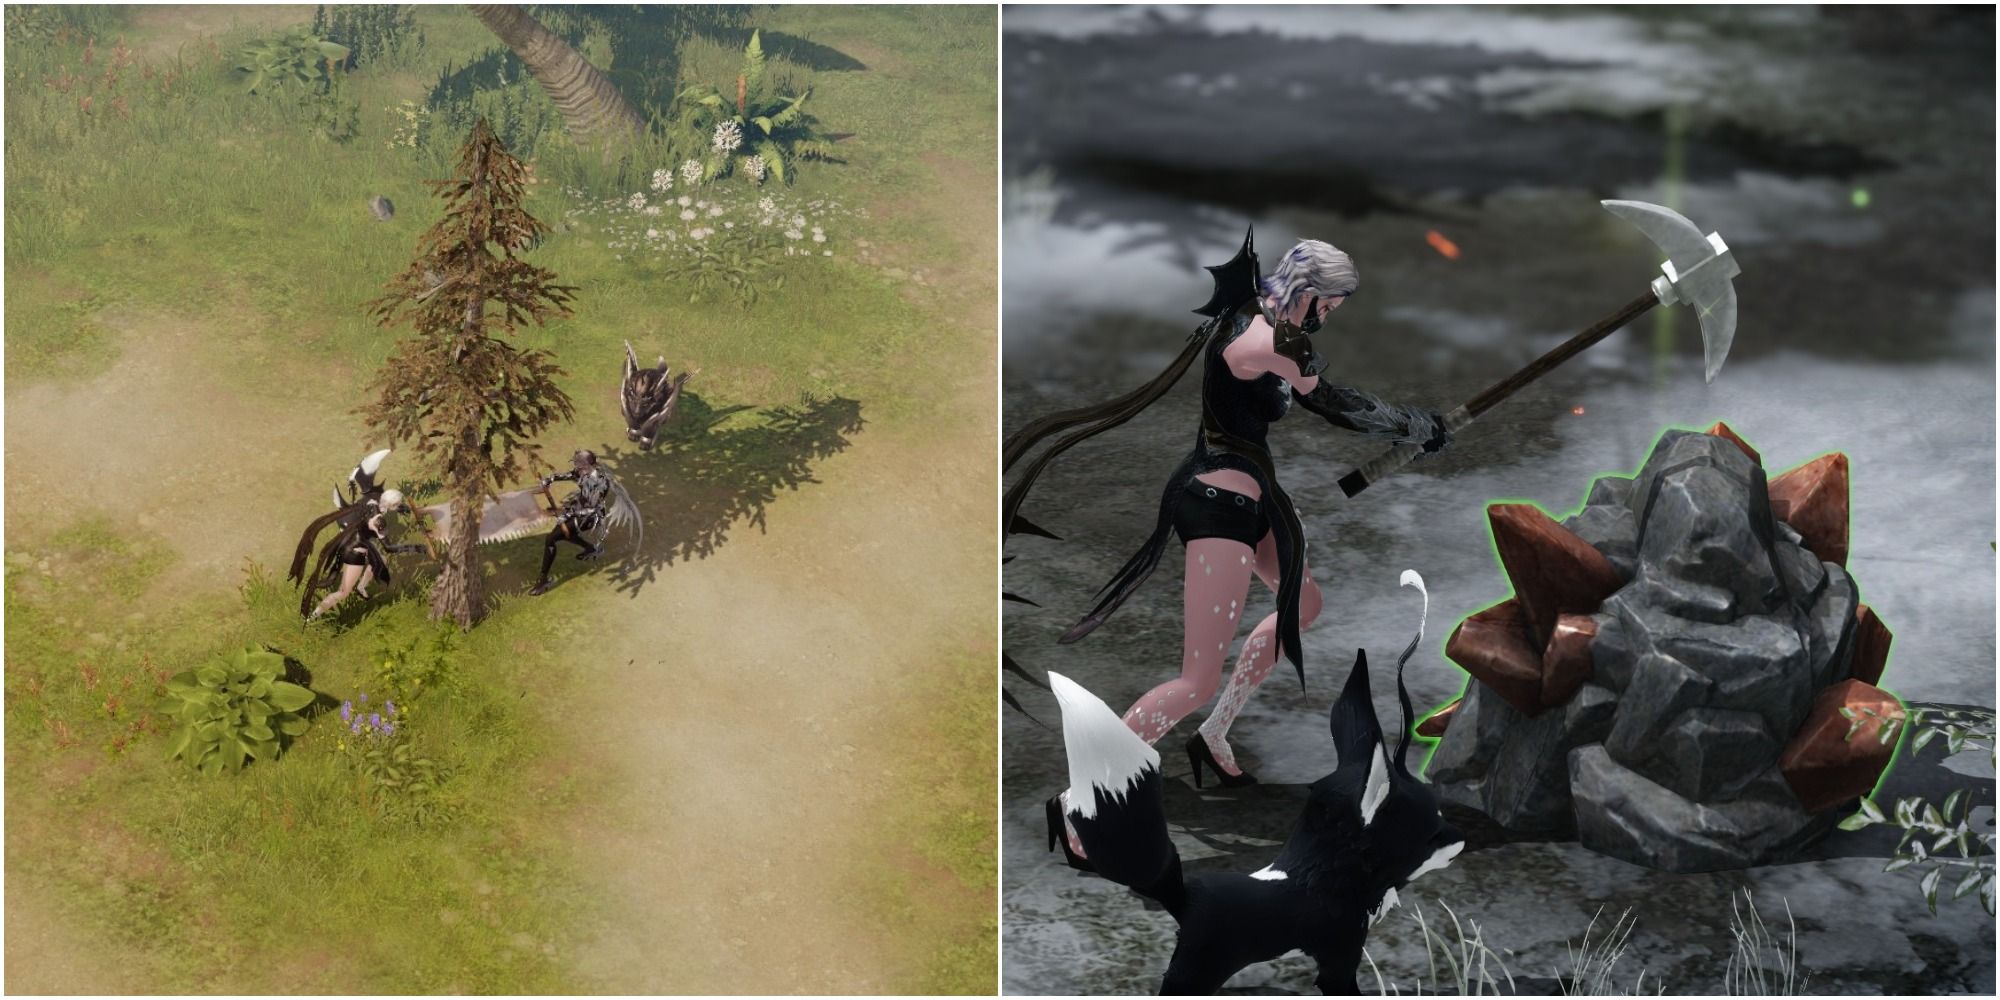 Lost Ark split image of player mining by herself and cutting down a tree with a friend